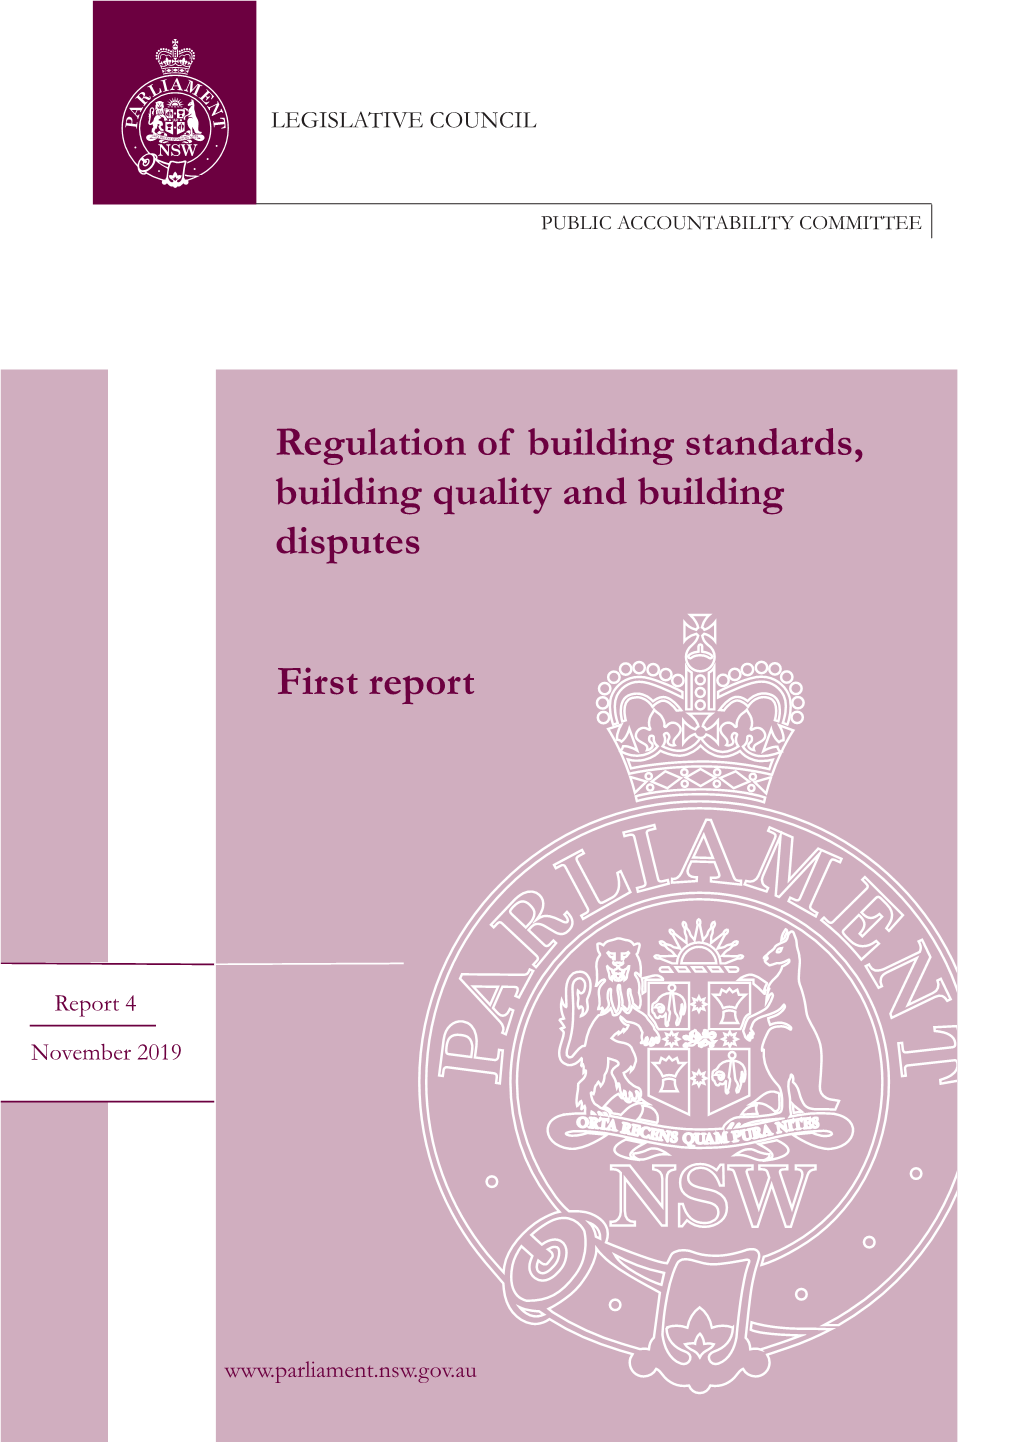 Regulation of Building Standards, Building Quality and Building Disputes First Report